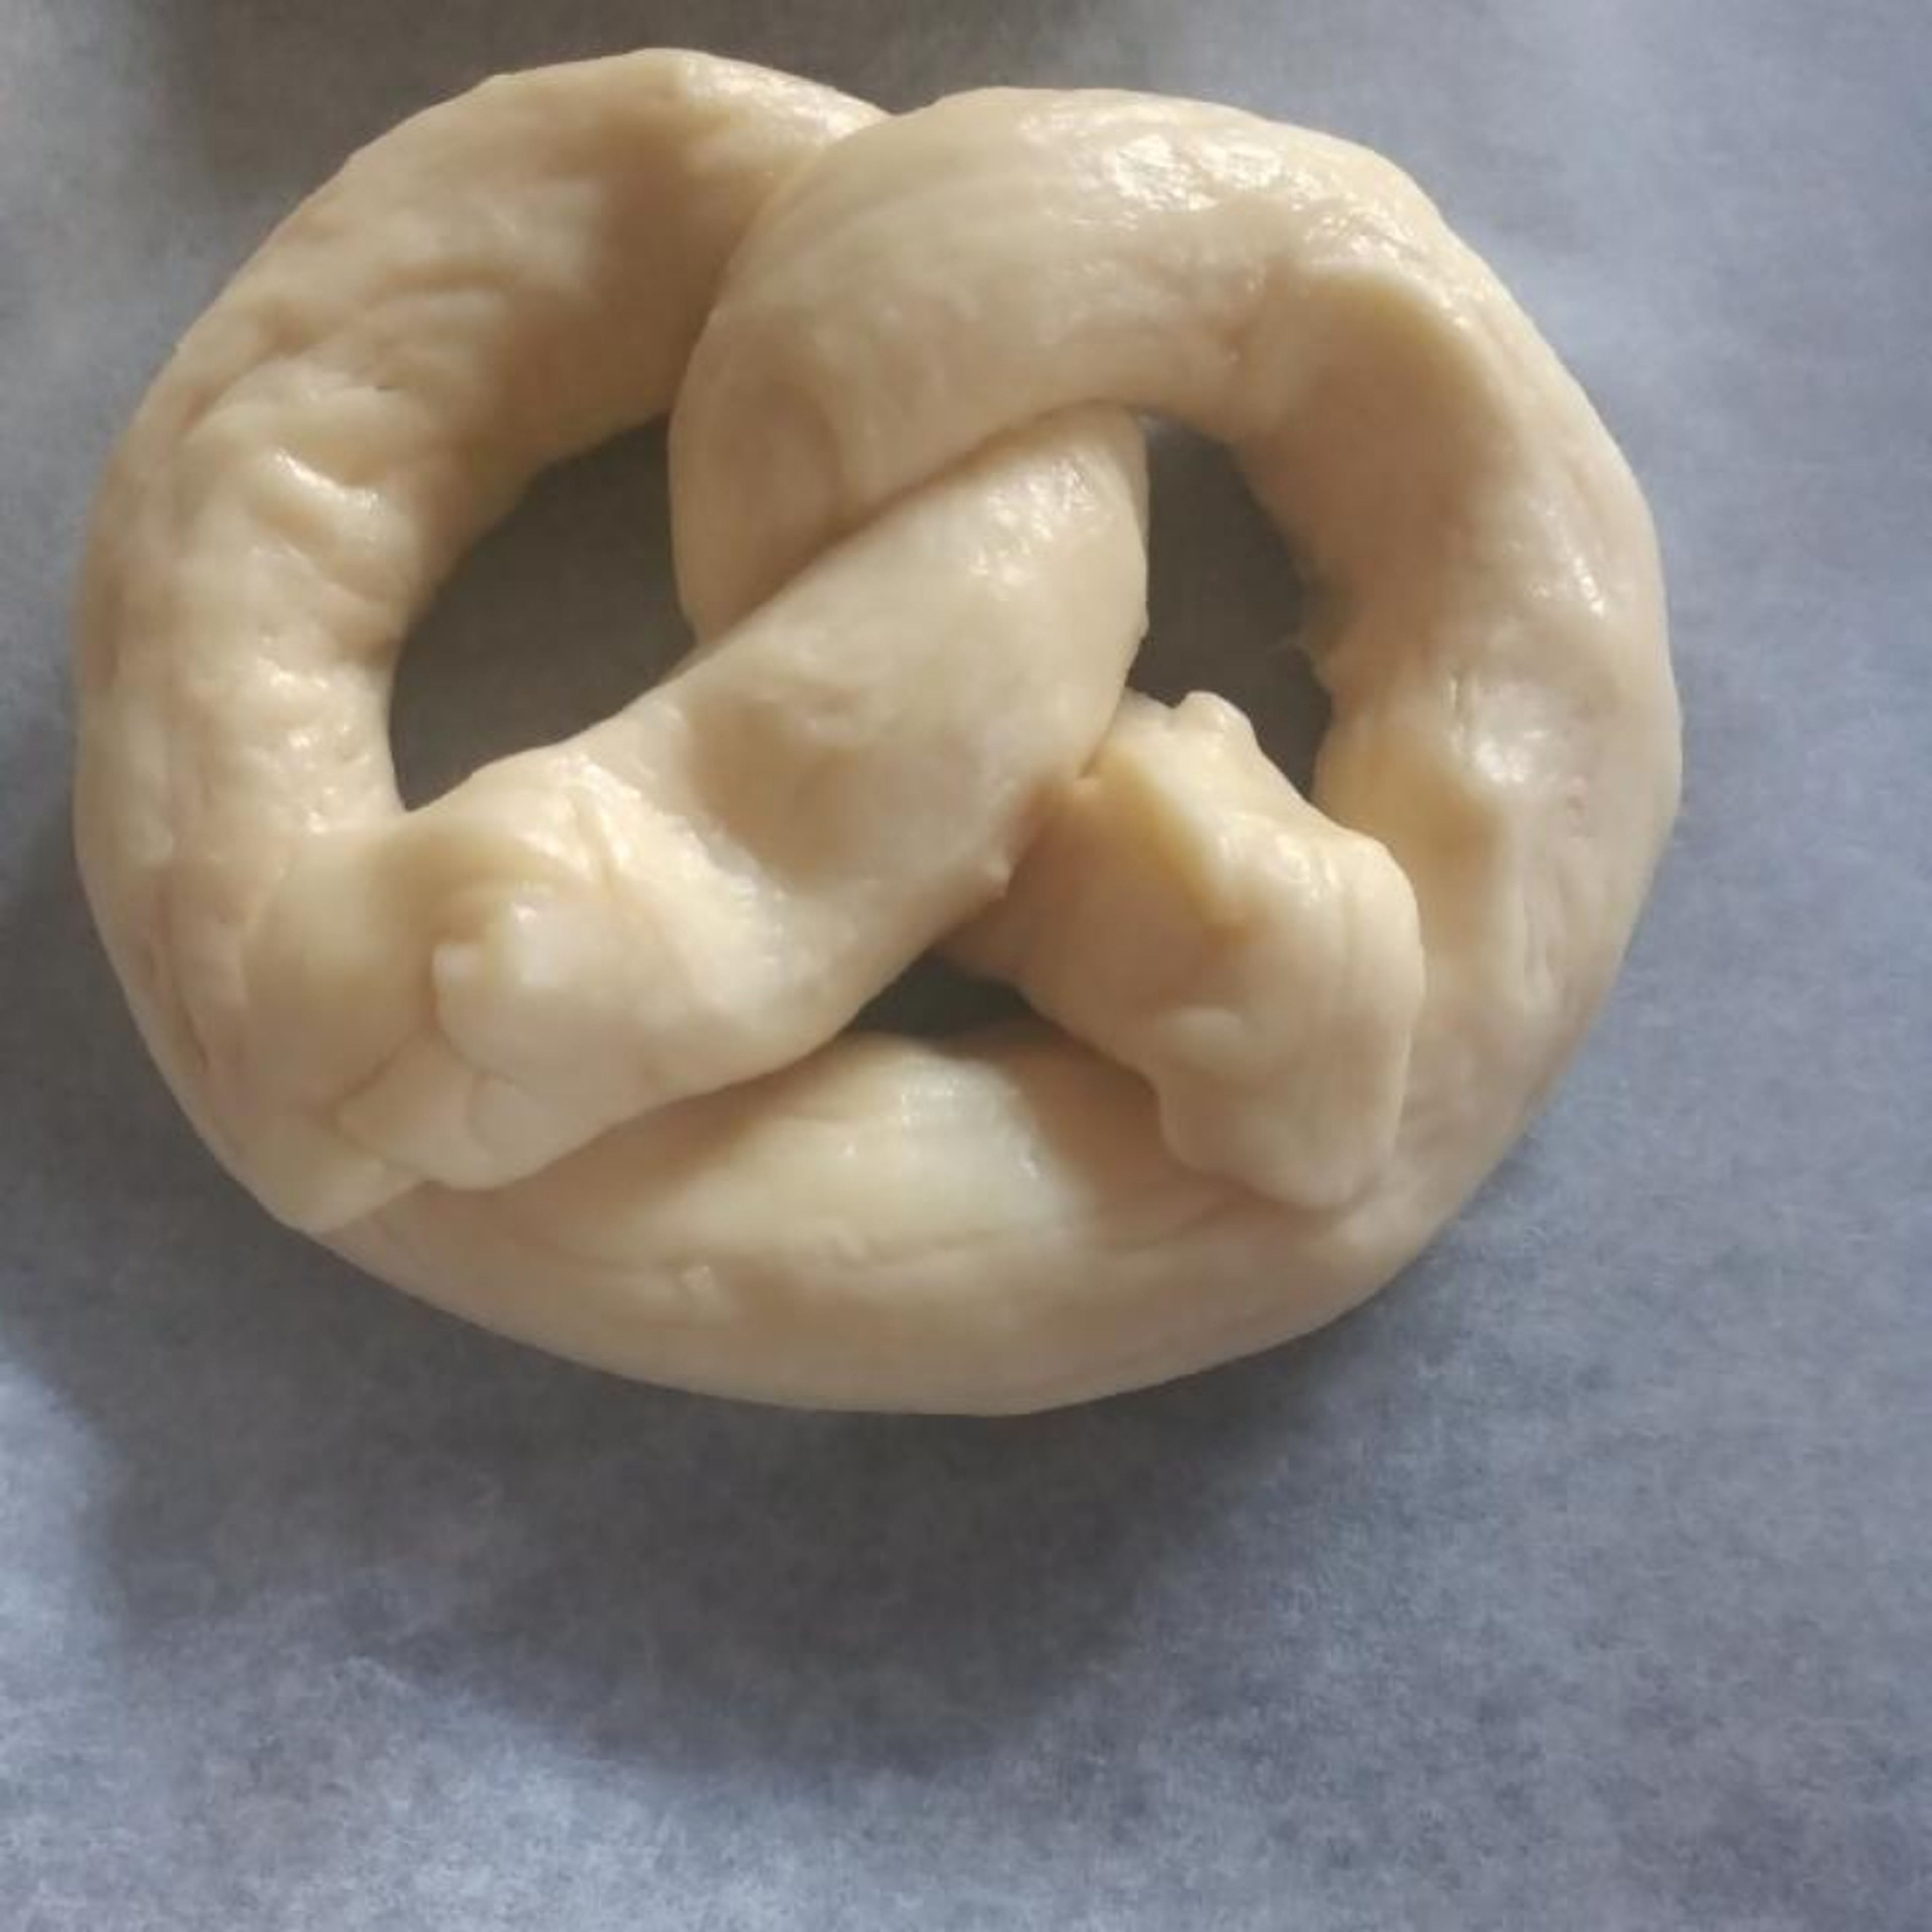 Shape into pretzels by making a horseshoe facing away from you, twisting the 2 sides together and placing the ends on the part nearest to you.